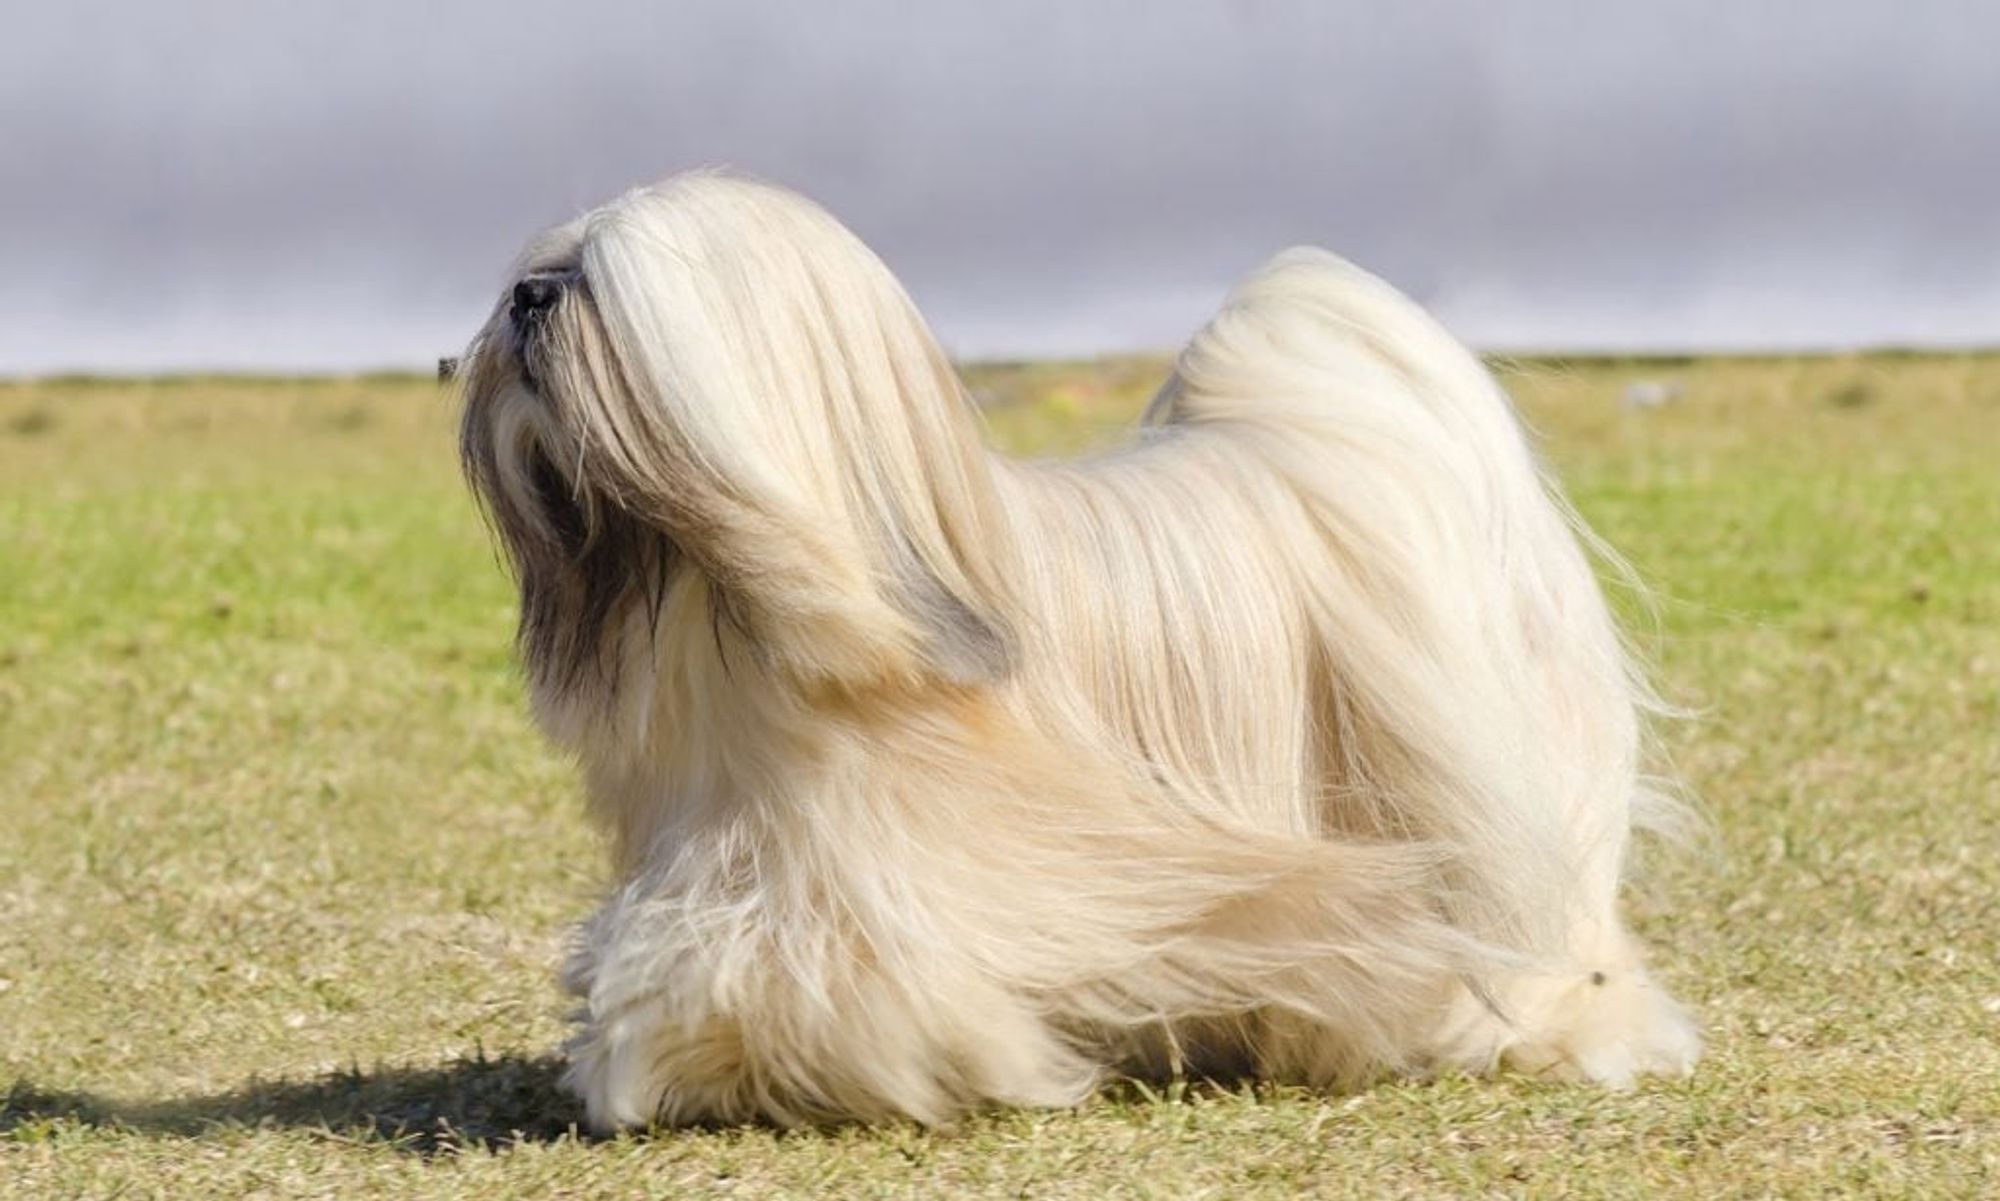 https://media-be.chewy.com/wp-content/uploads/2021/05/21104130/Lhasa-Apso-FeaturedImage-1024x615.jpg